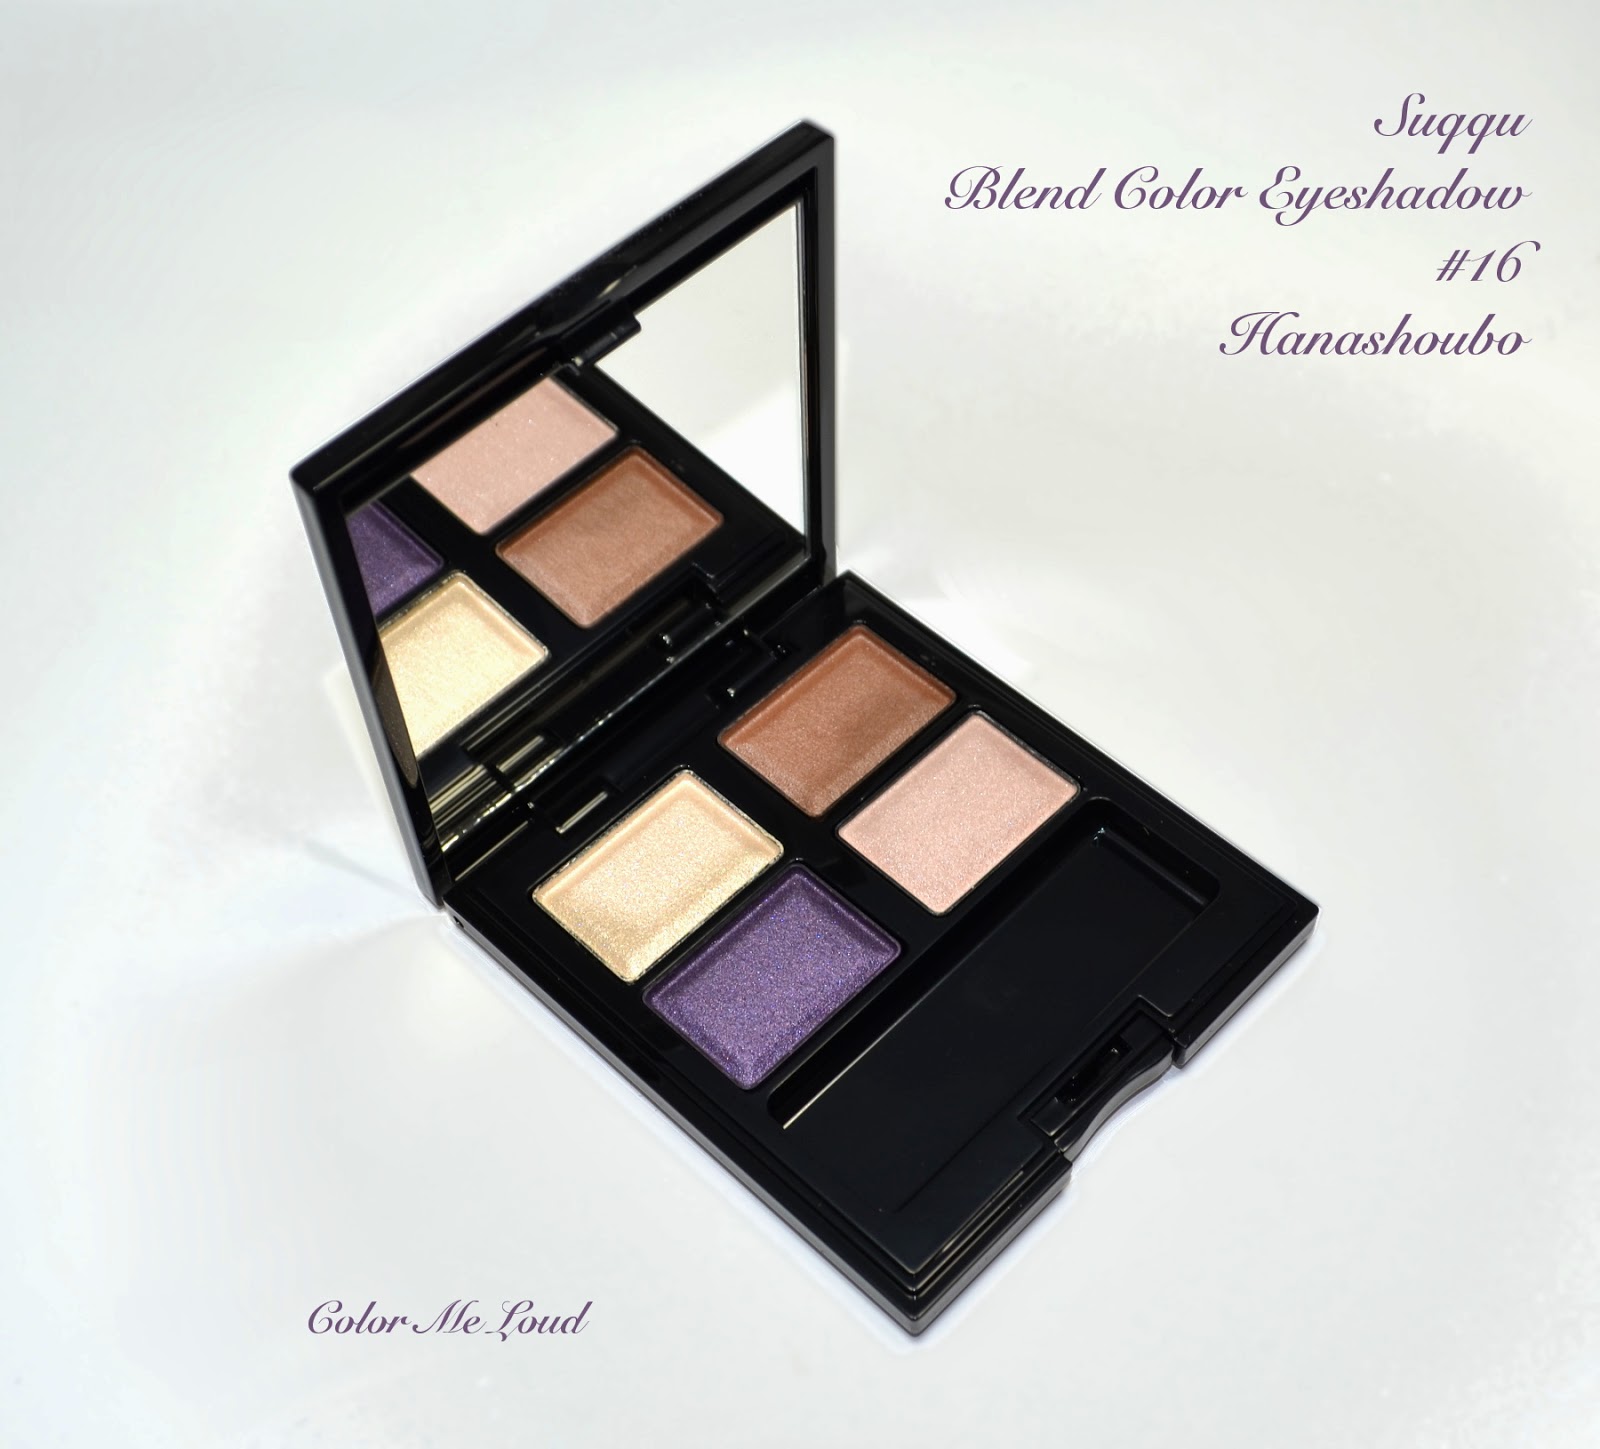 Suqqu Blend Color Eyeshadow #16 Hanashuobo for Spring 2014, FOTD, Swatch & Review